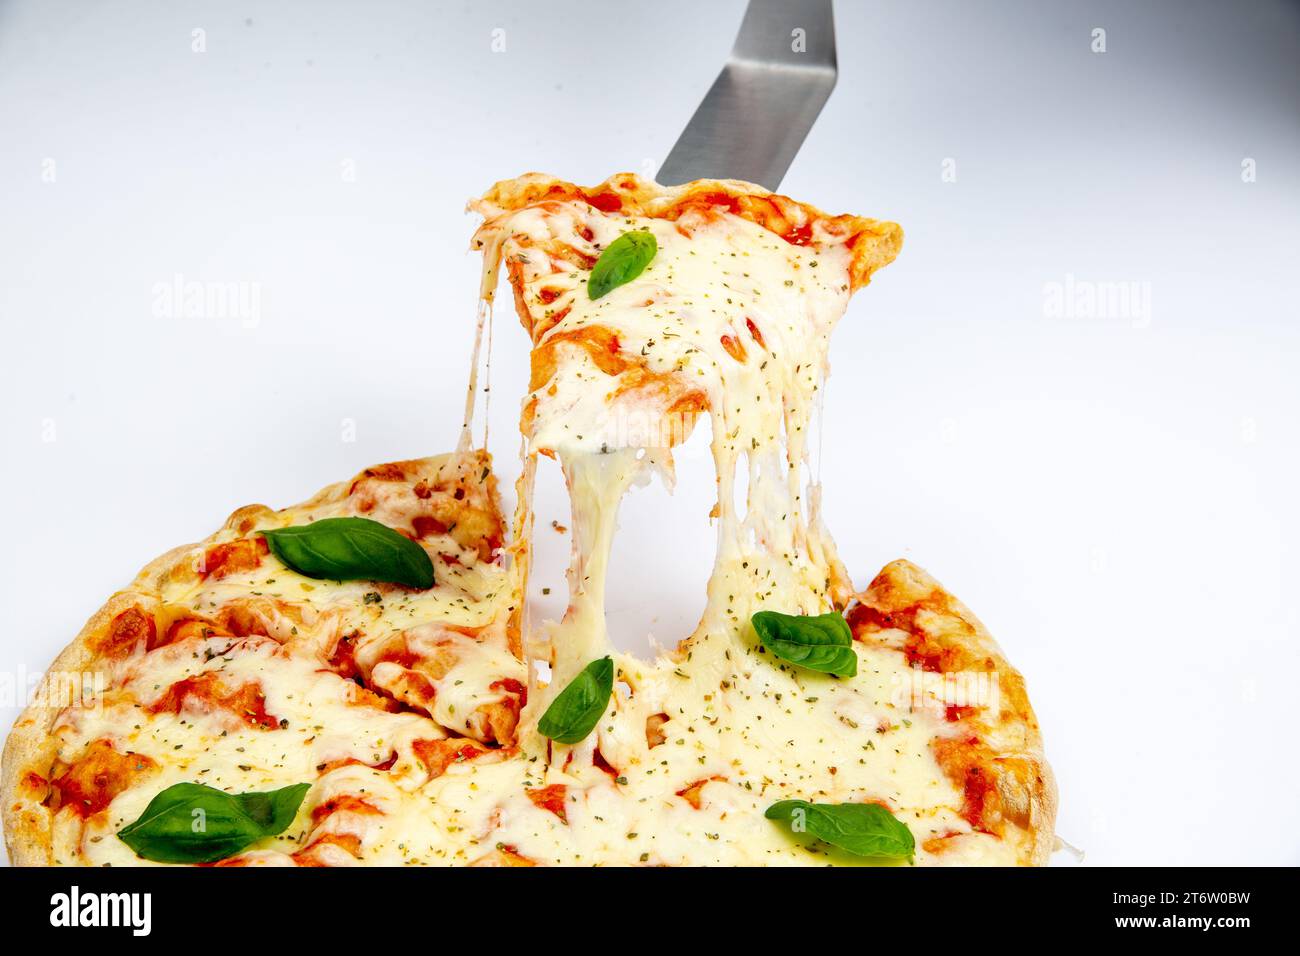 A close-up image of a large slice of pizza being held up by a fork Stock Photo